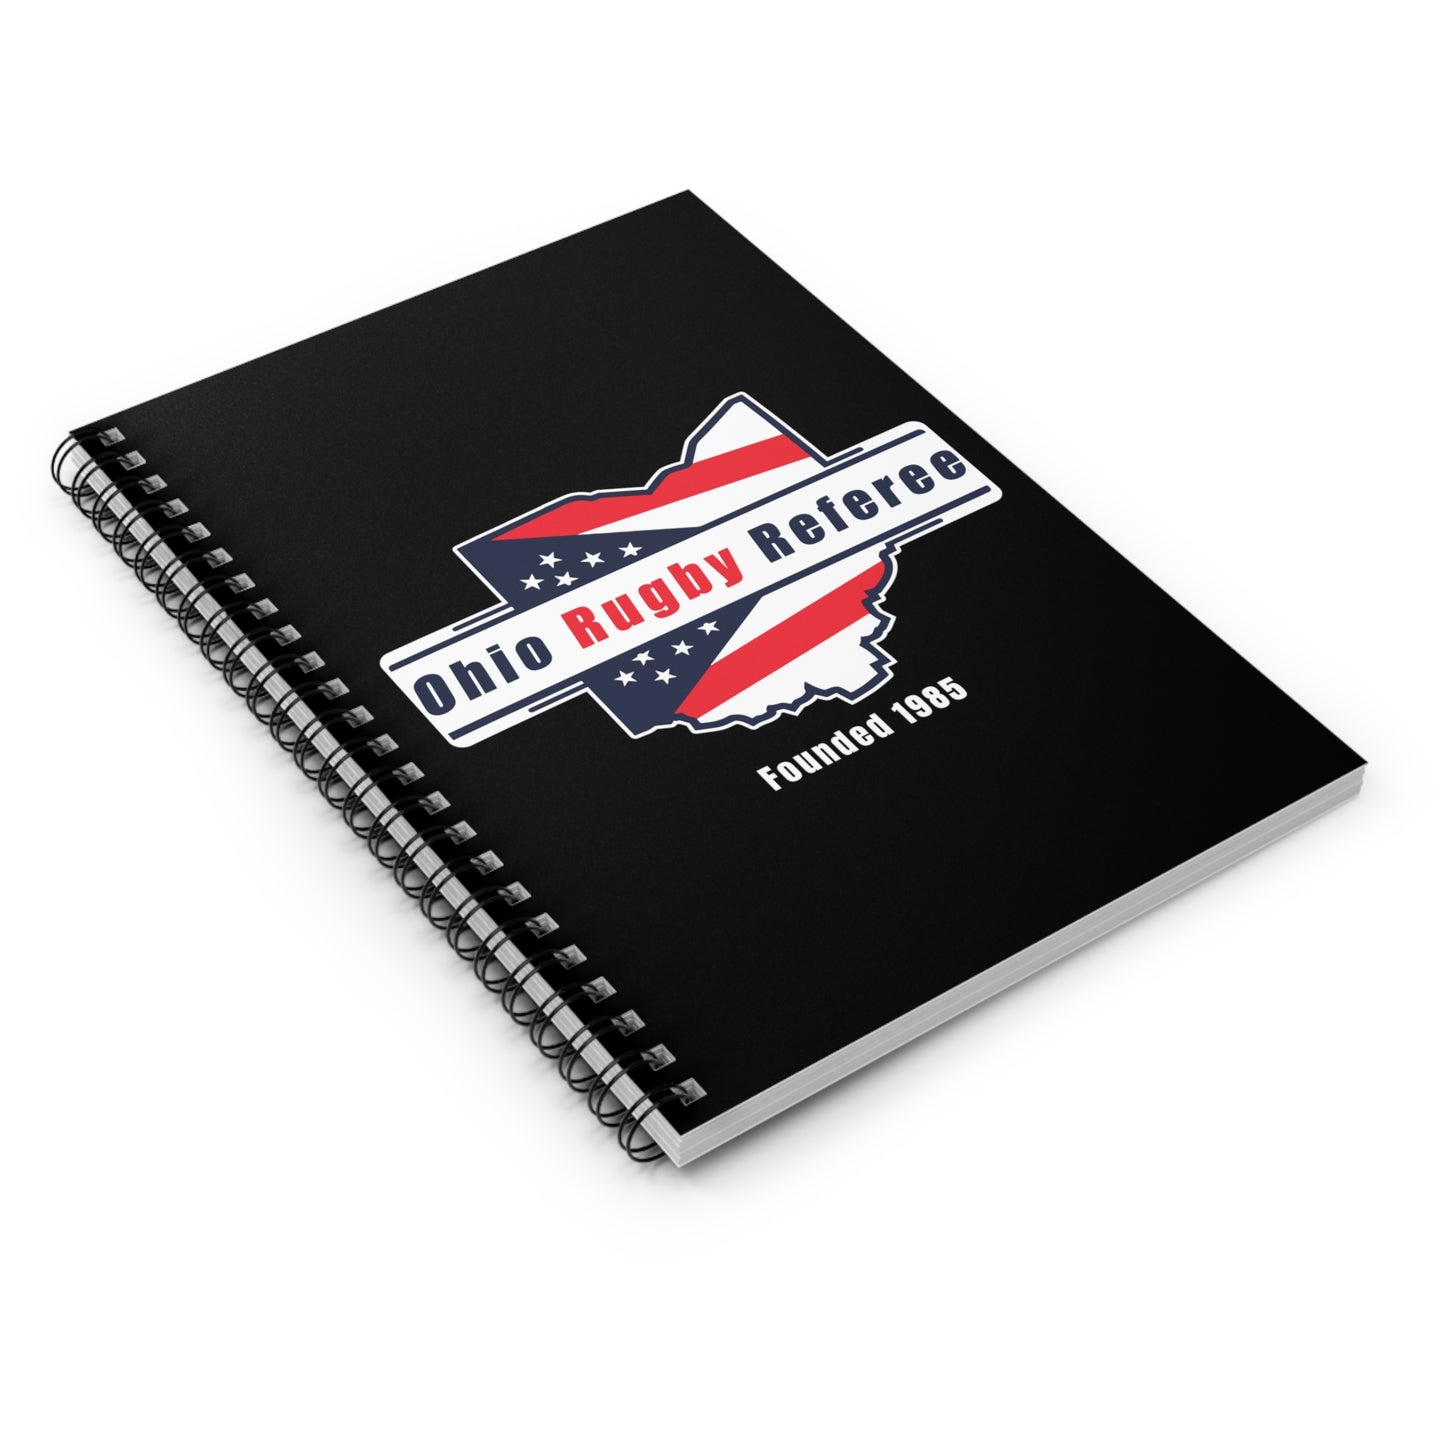 Spiral Notebook - Ruled Line | Ohio Rugby Referee Society